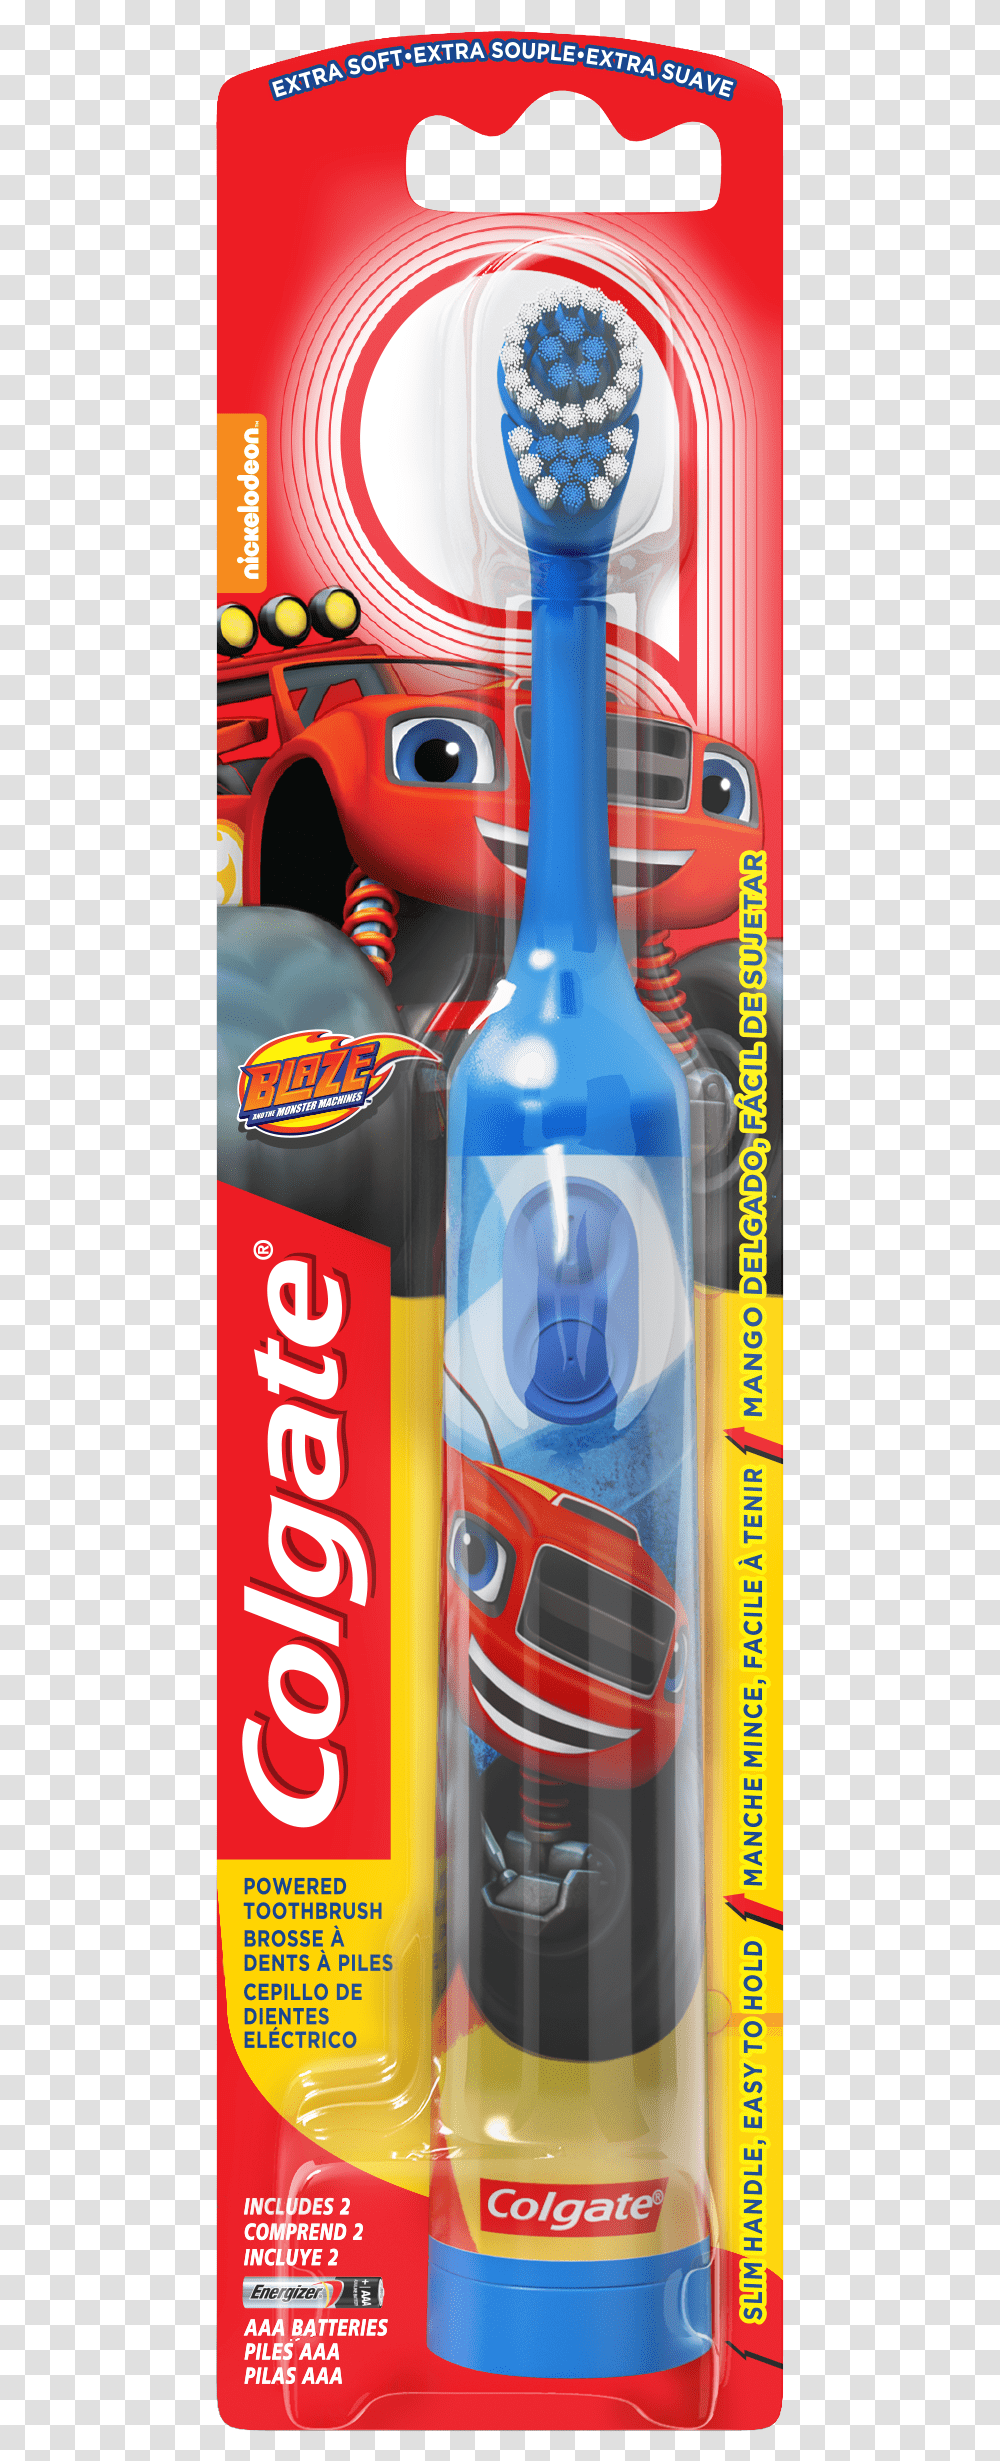 Colgate Minions Power Toothbrush, Soda, Beverage, Drink, Bottle Transparent Png